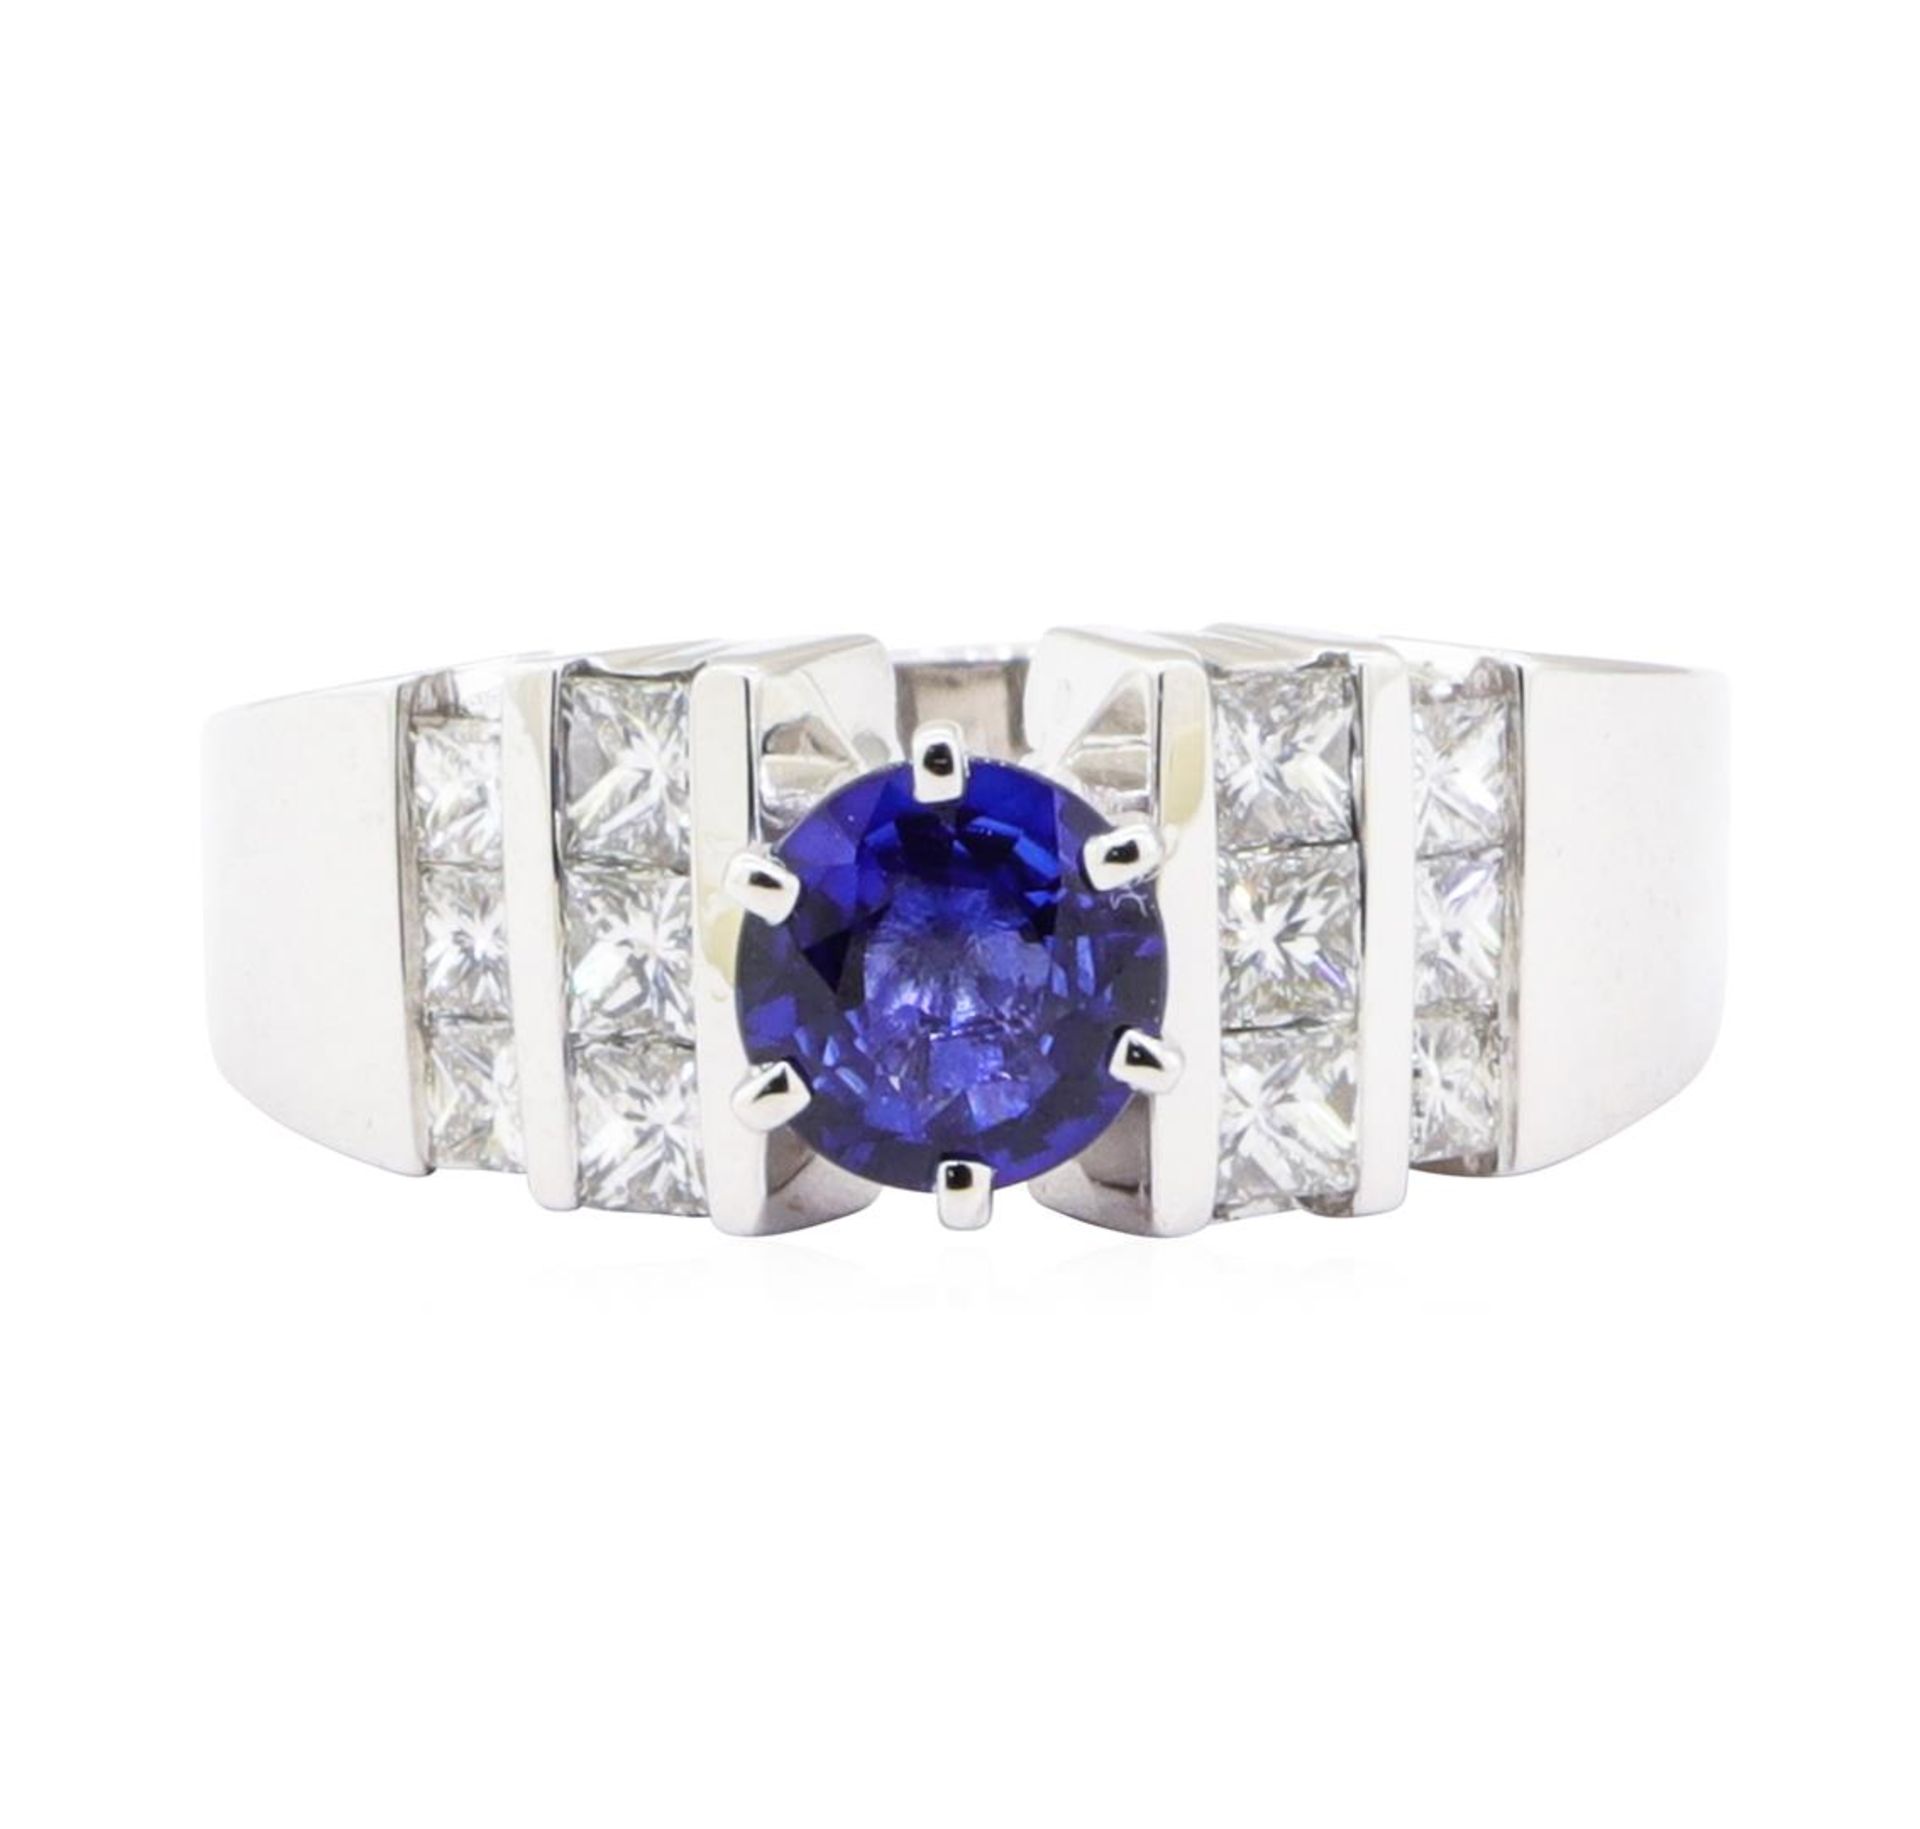 1.12 ctw Sapphire And Diamond Ring - 14KT White Gold - Image 2 of 5